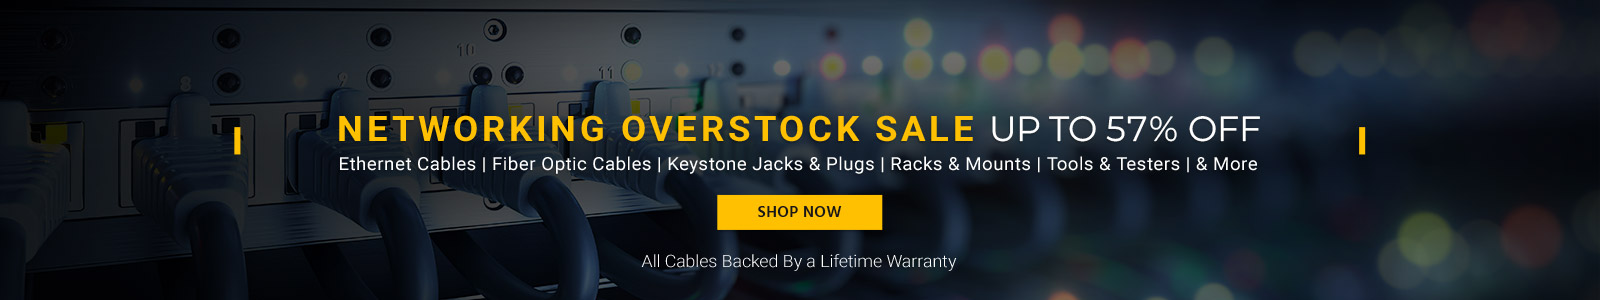 Networking Overstock Sale
Up to 57% off
Ethernet Cables | Fiber Cables | Keystone Jacks | Racks & Mounts | Tools & Testers | & More

Shop Now
All Cables Backed By a Lifetime Warranty